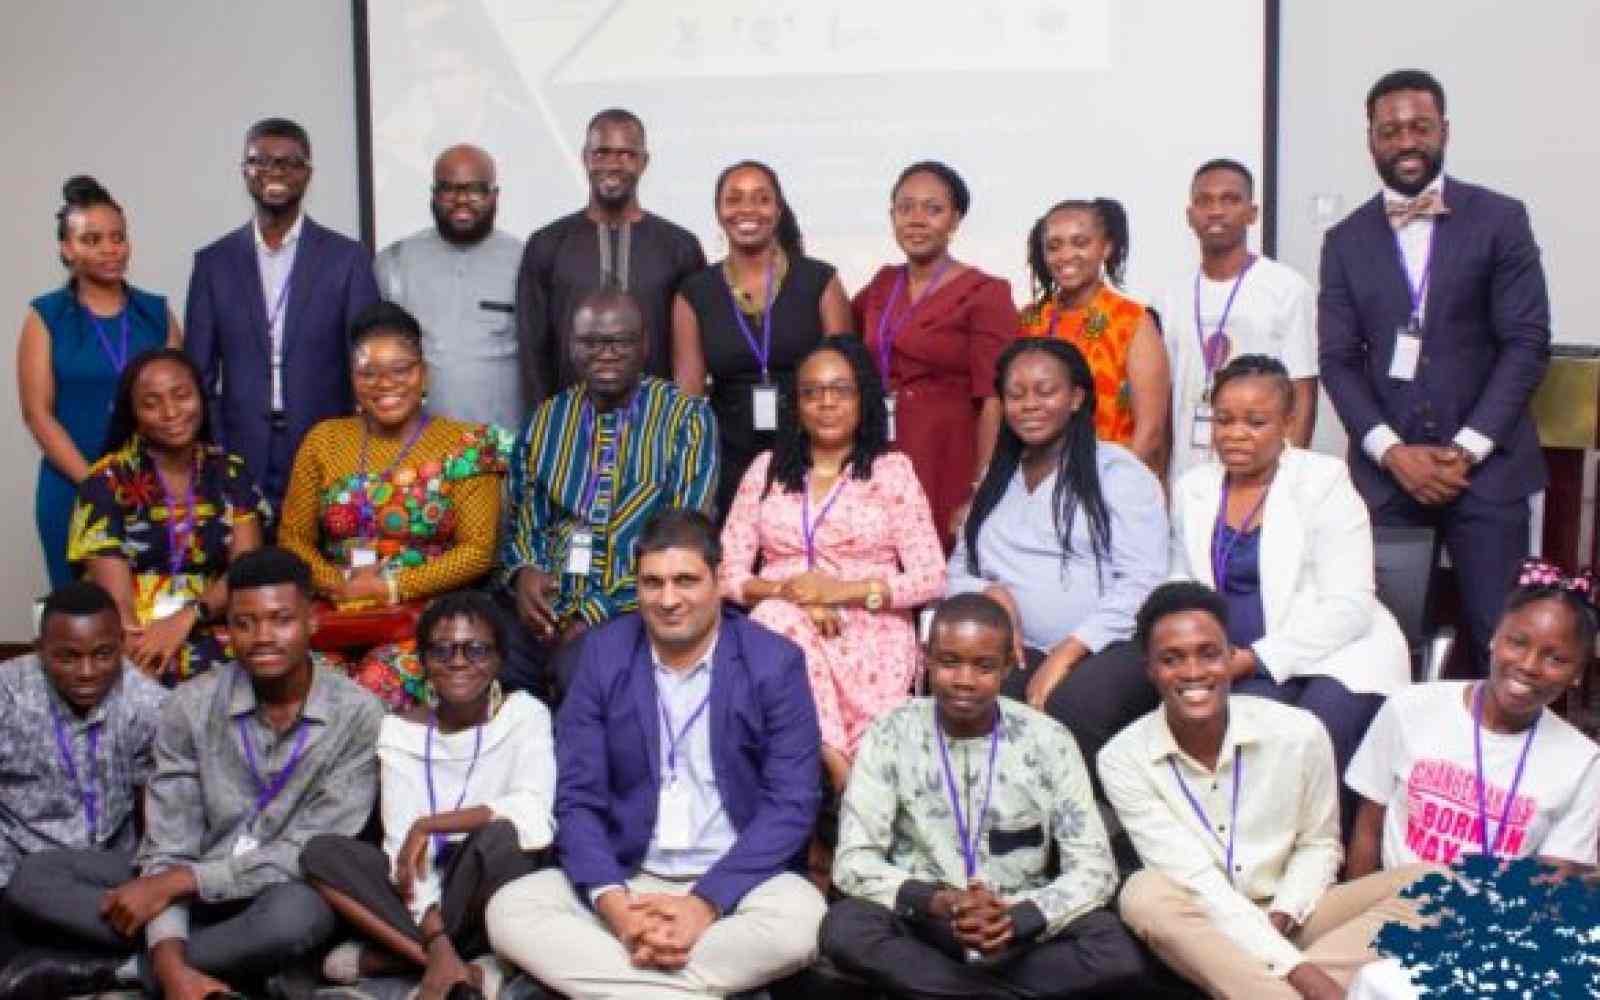 Photo of a group of people in three levels and three rows: sitting, kneeling and standing. Photo shows the Ashoka Nigeria team as well as 6 Young Changemakers at a launch event for the EACH movement in Nigeria